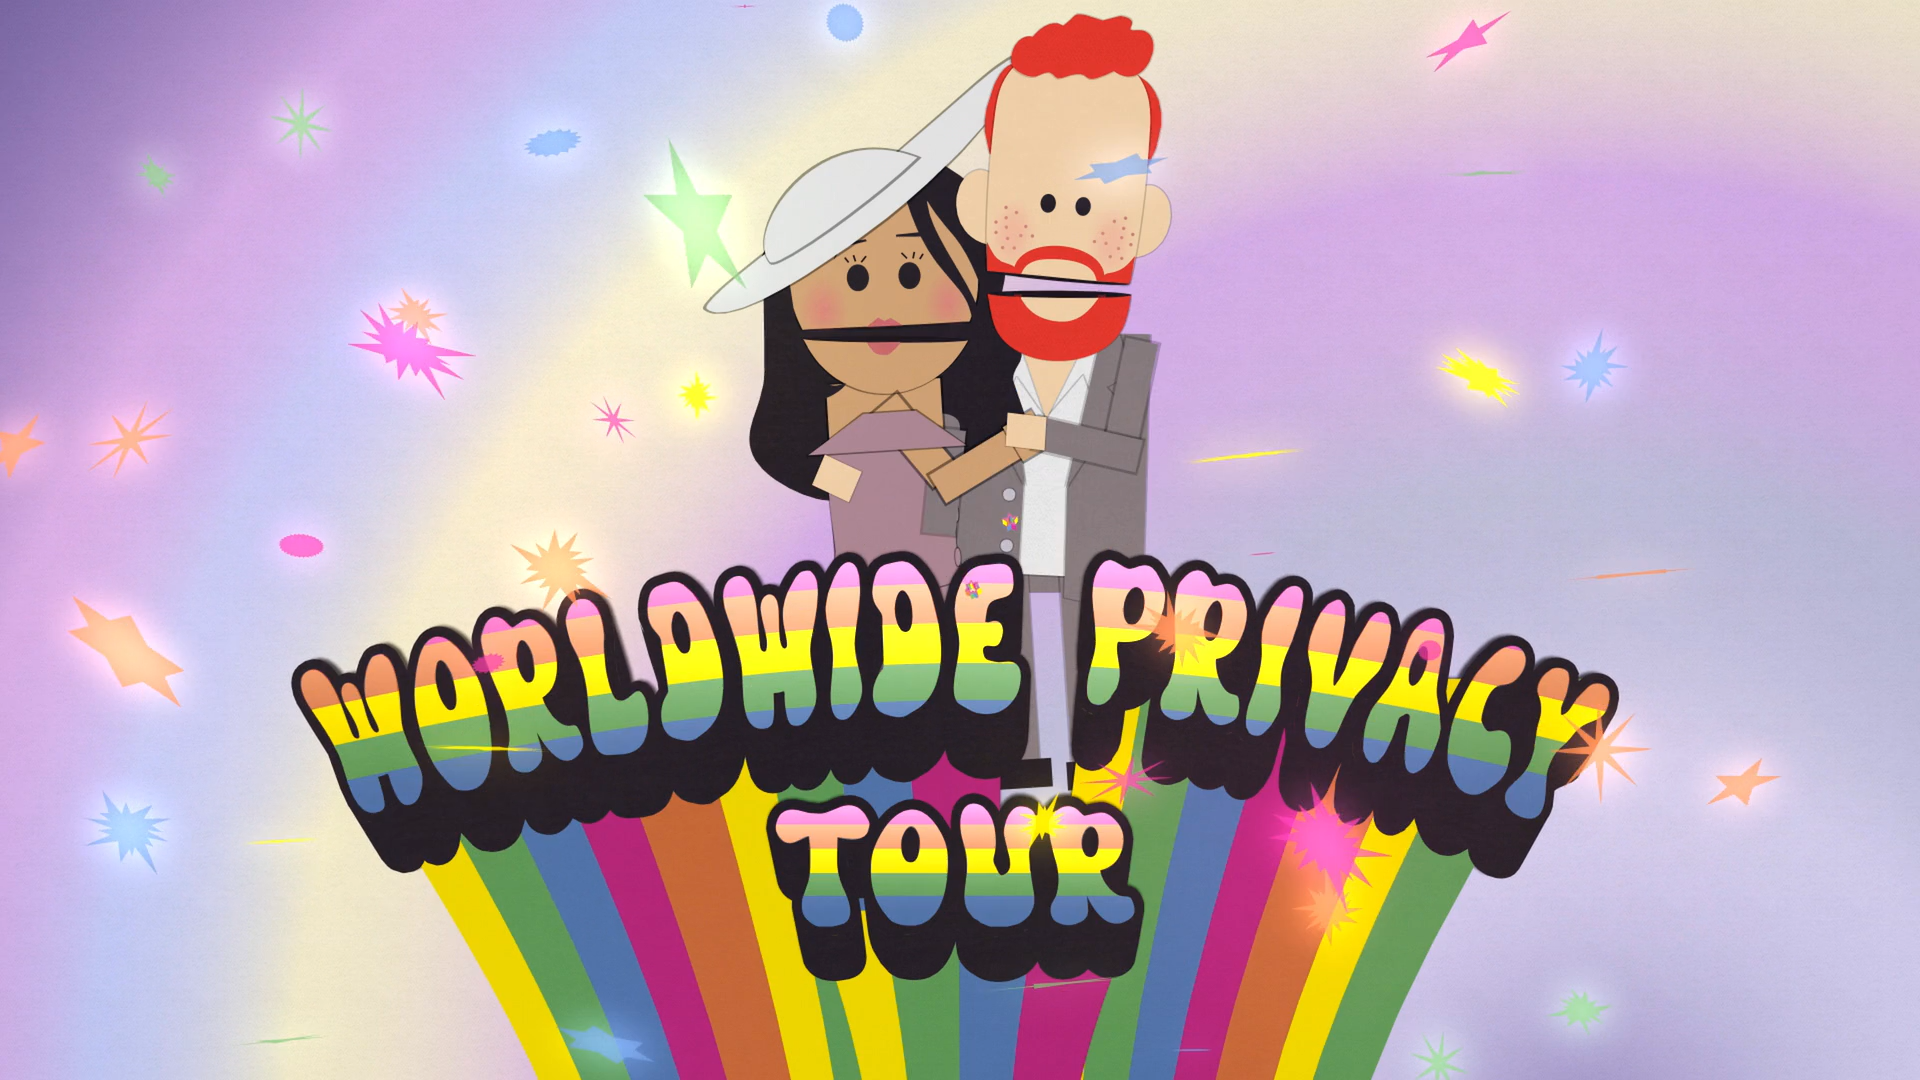 Princess of Canada (The Worldwide Privacy Tour), South Park Archives